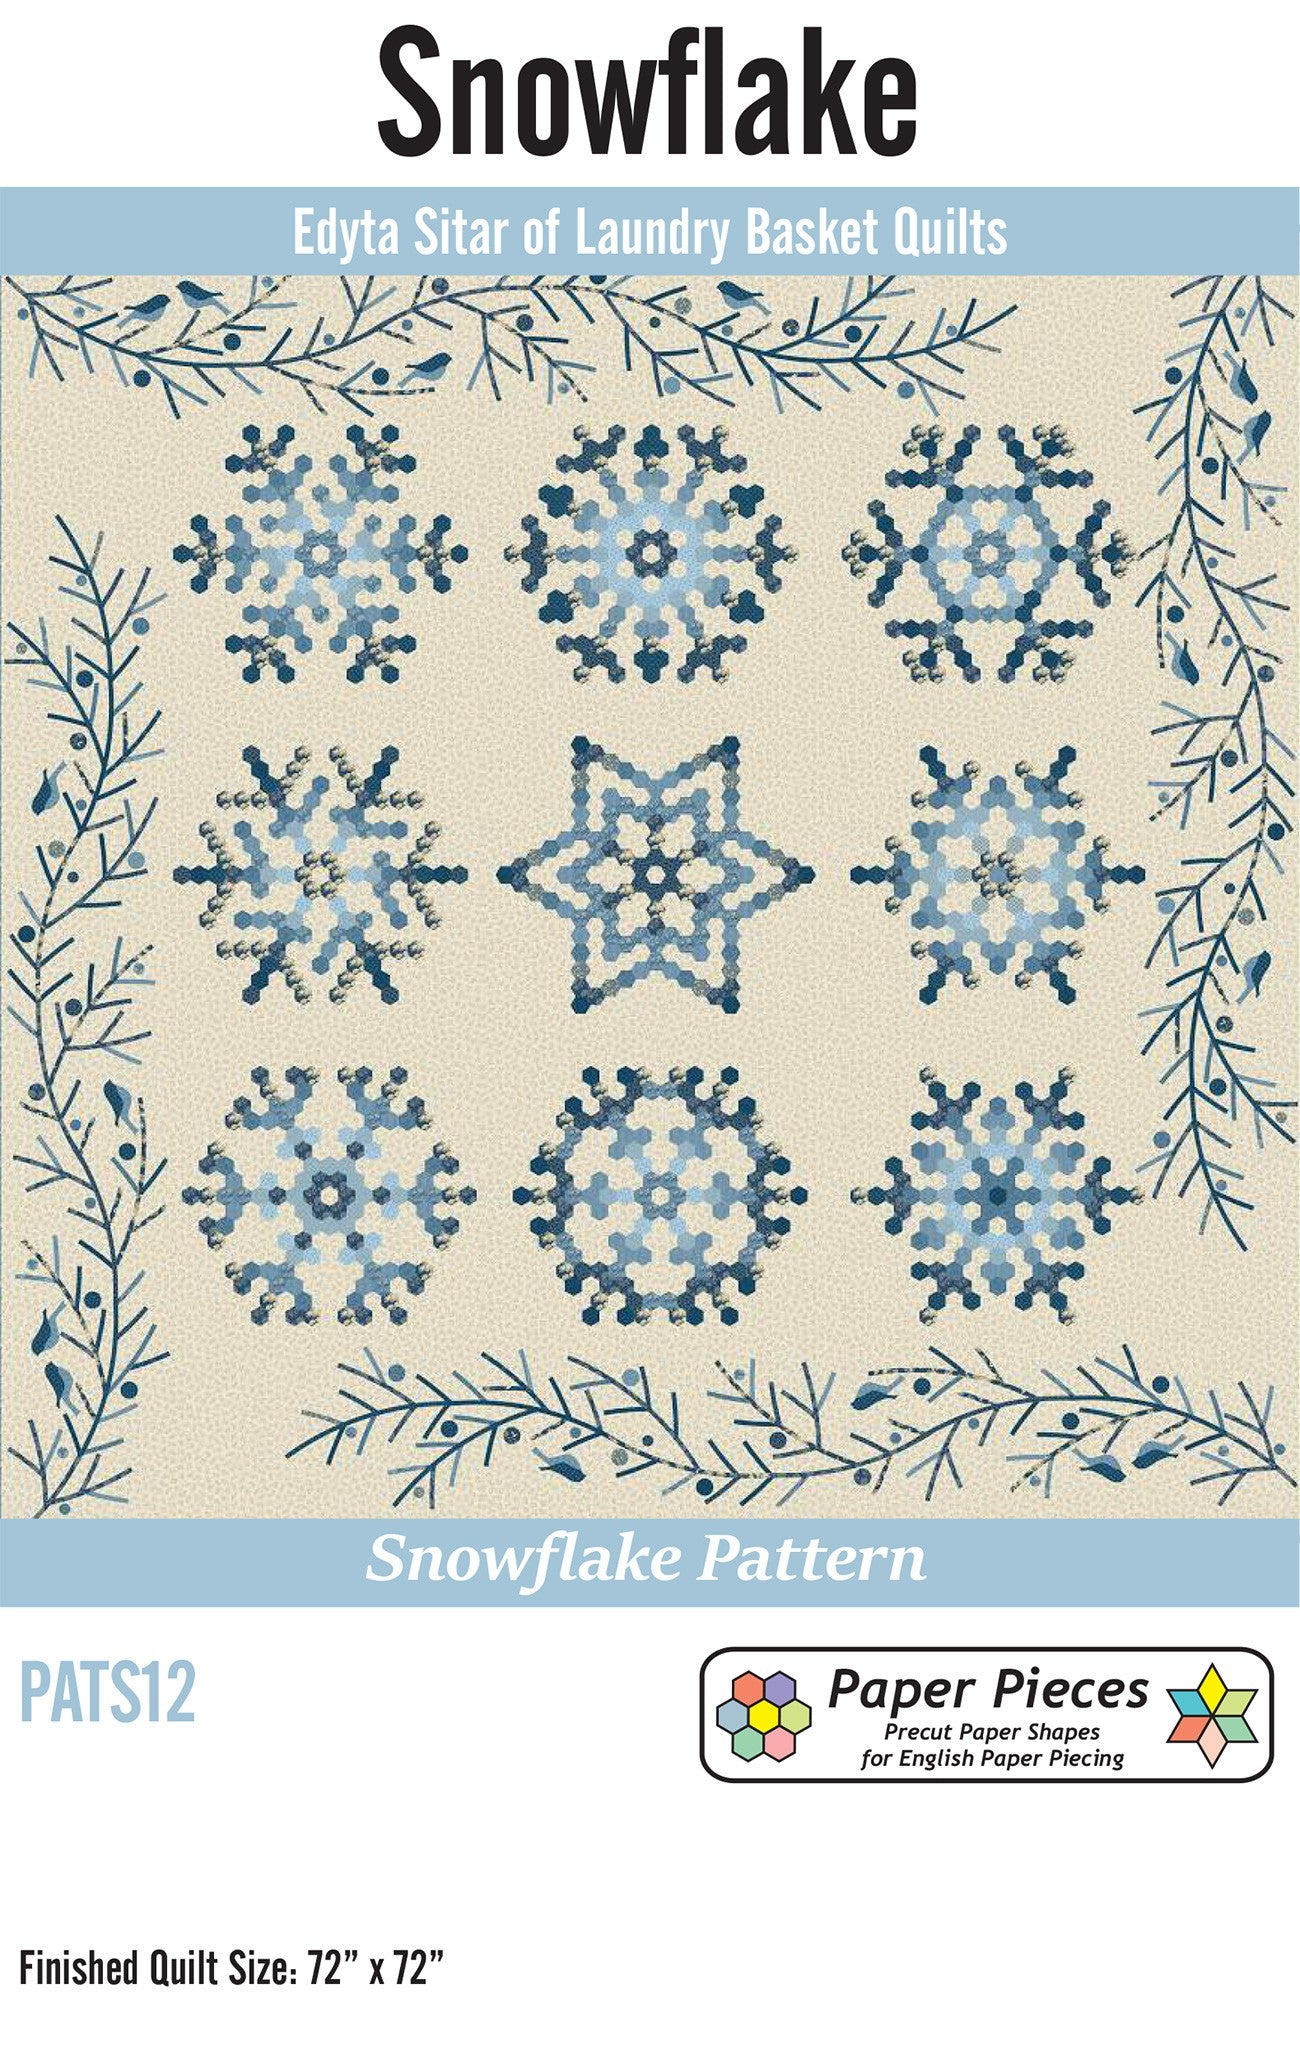 Snowflake Pattern Only